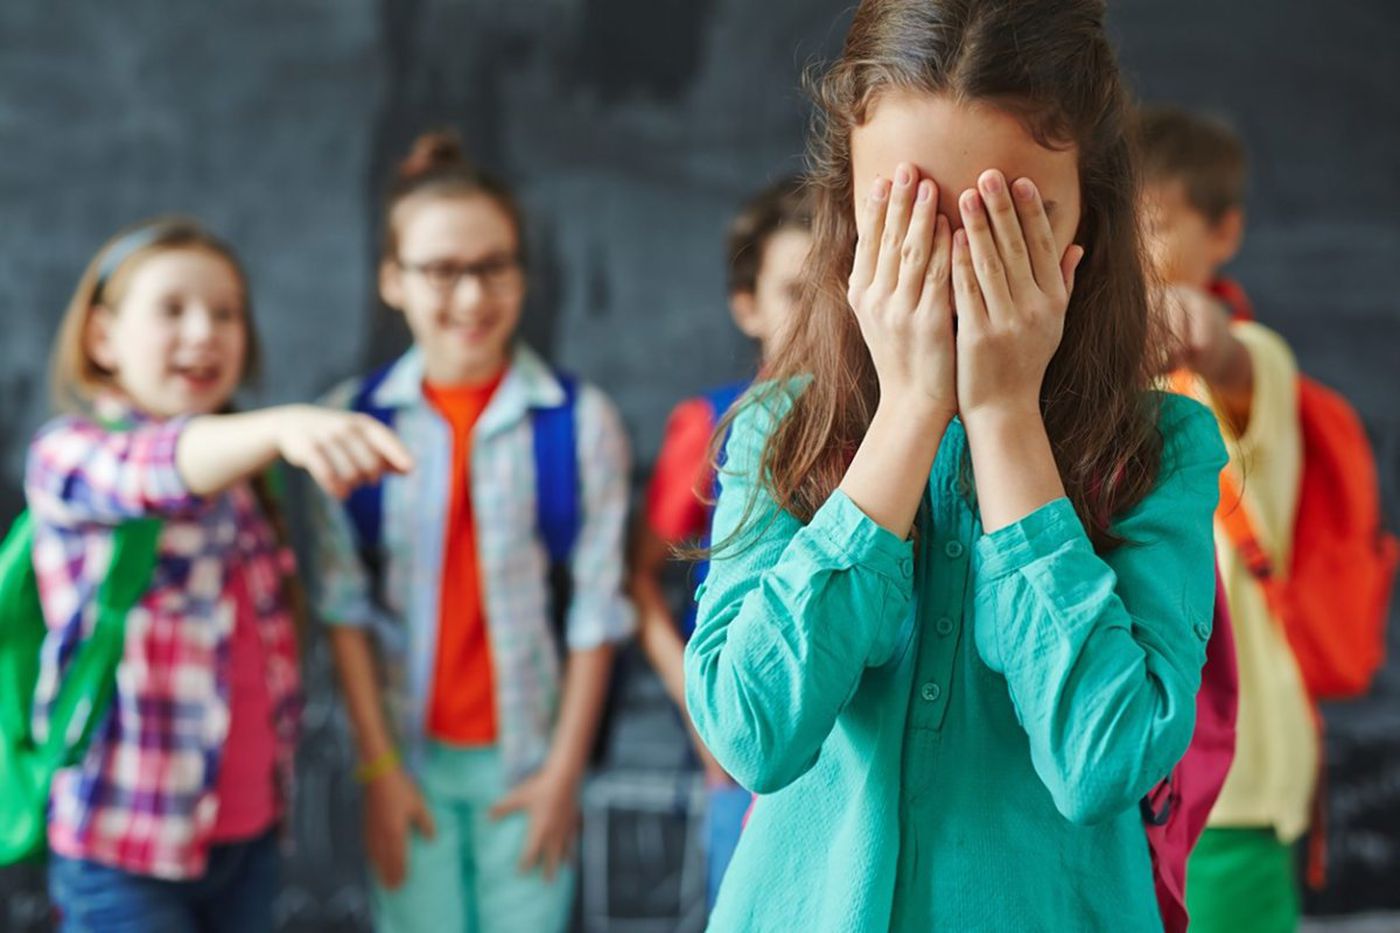 http://www.youthincmag.com/how-to-deal-with-bullying